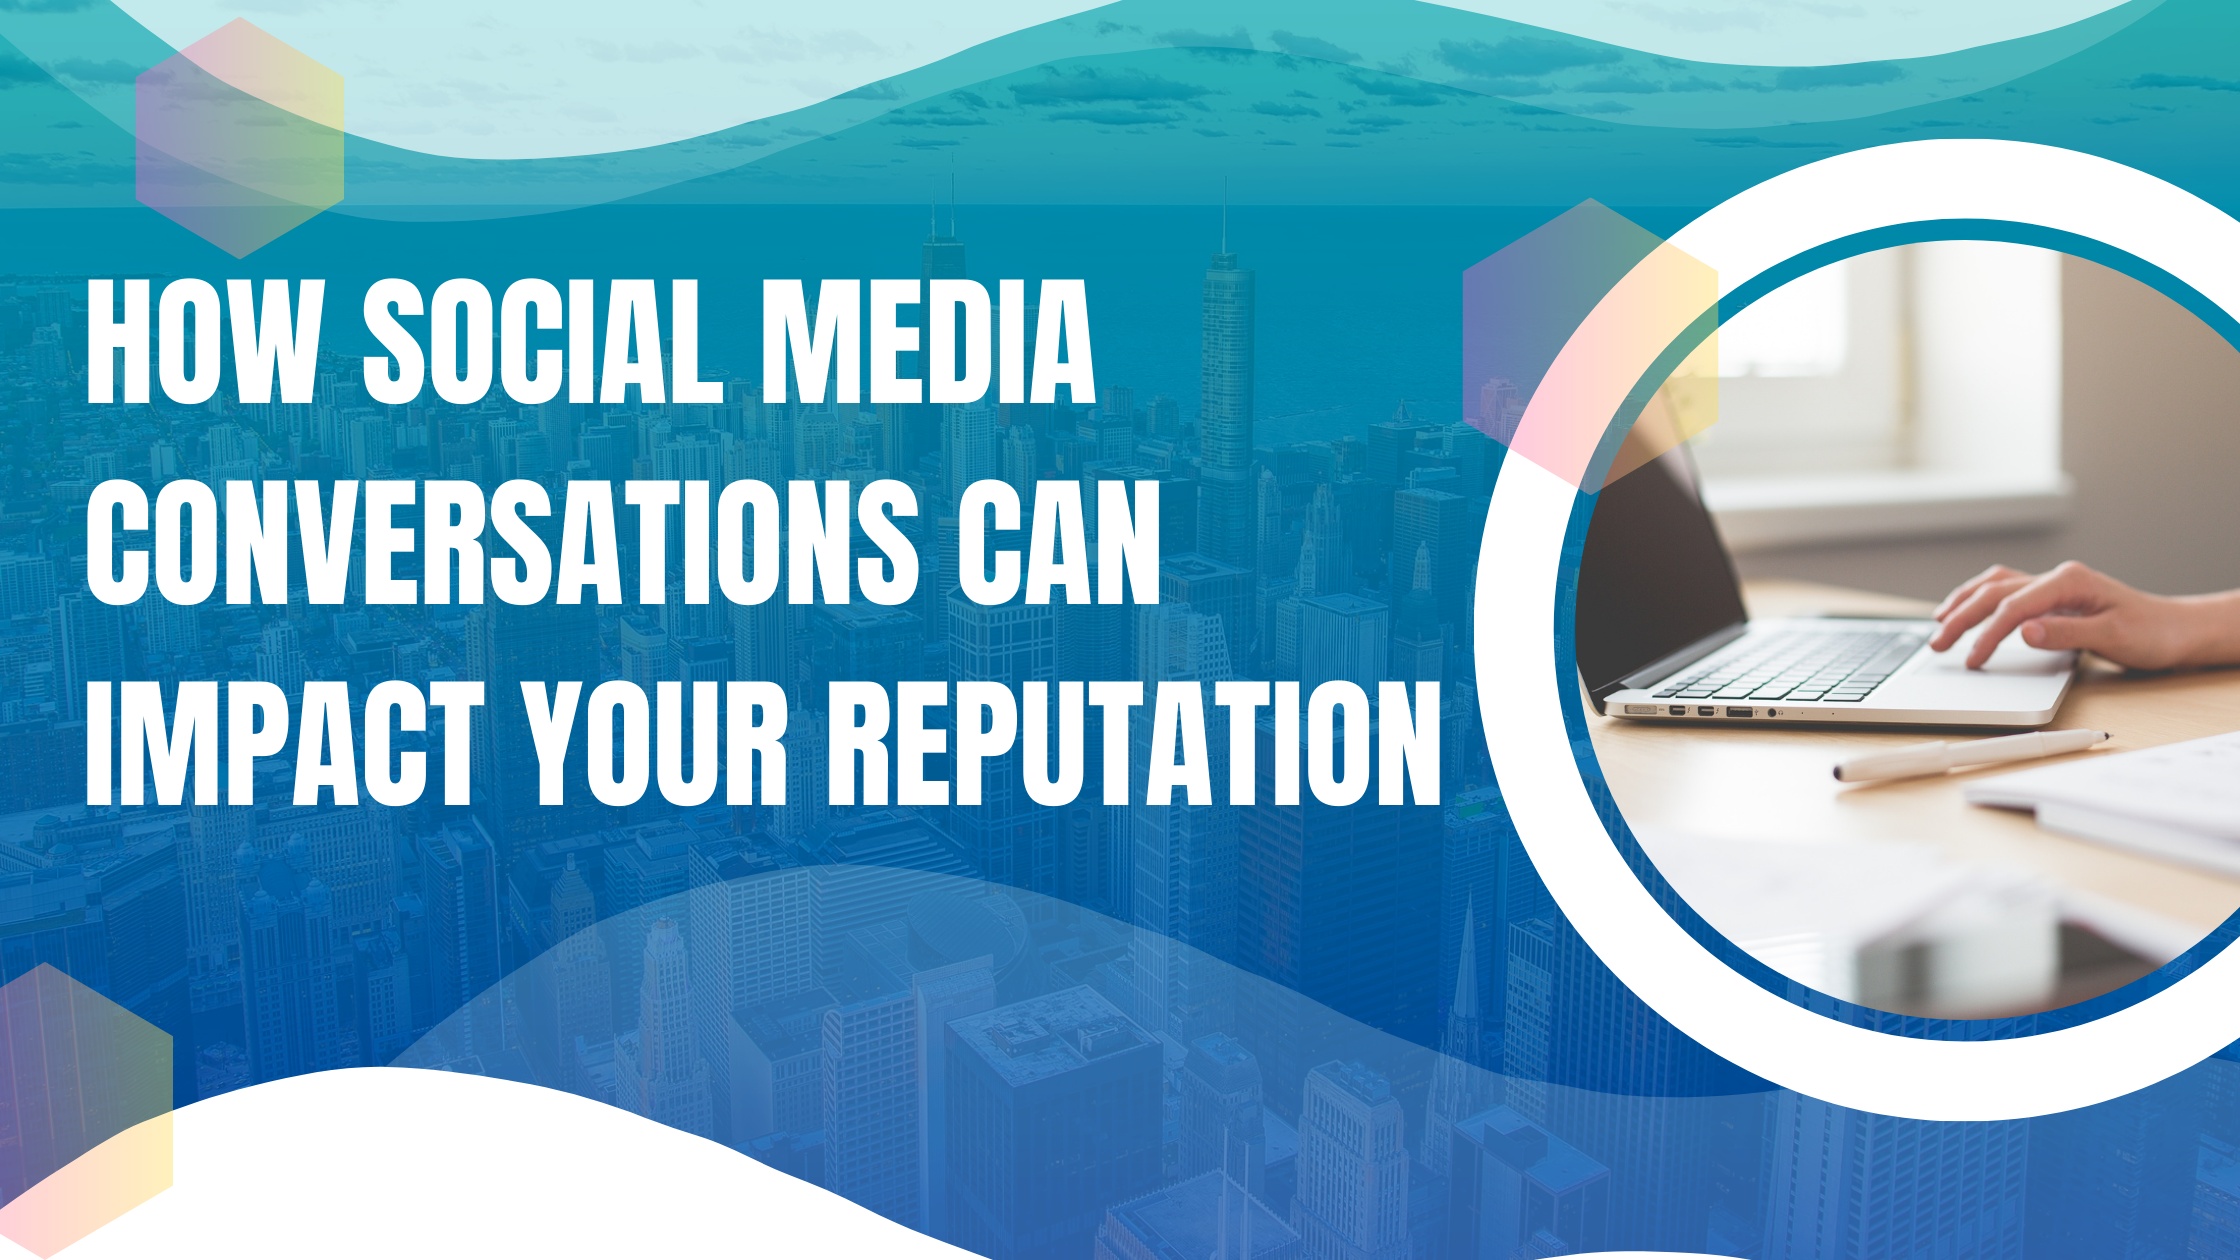 How Social Media Conversations Can Impact Your Reputation